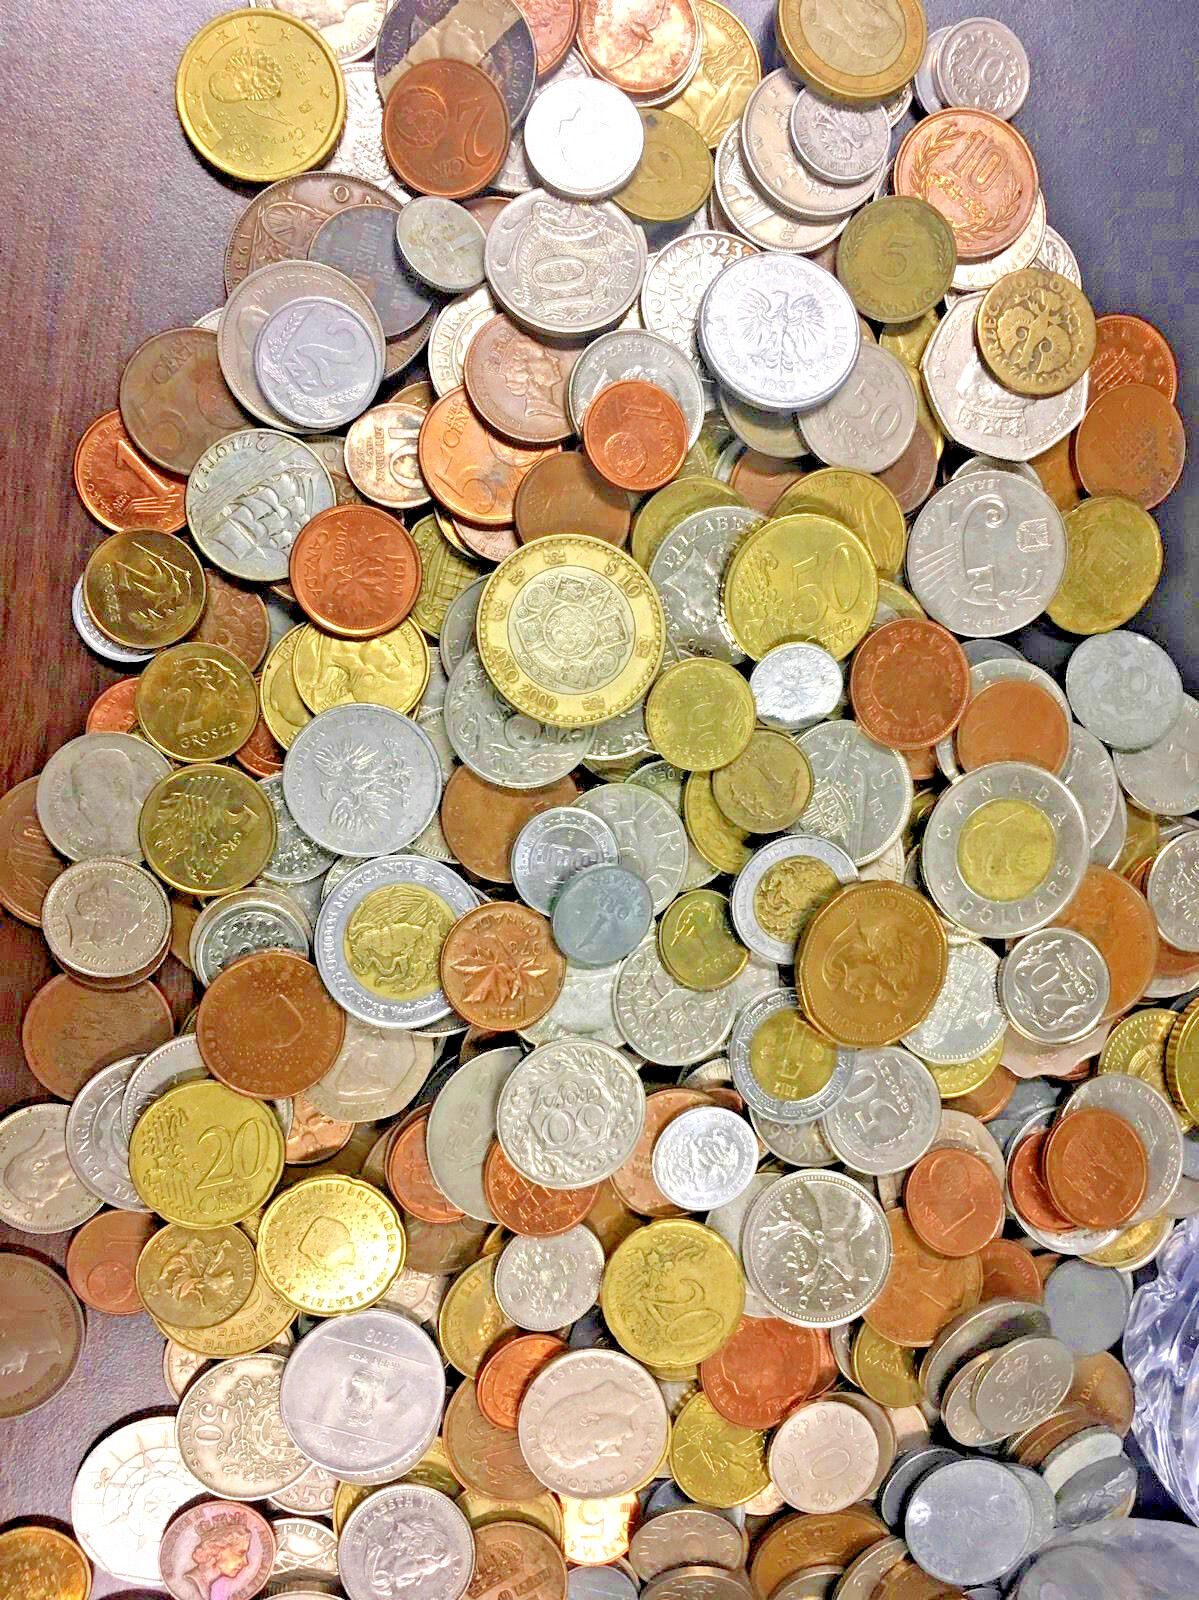 Bulk Lot 25 FOREIGN WORLD COINS No Duplicates in each Lots